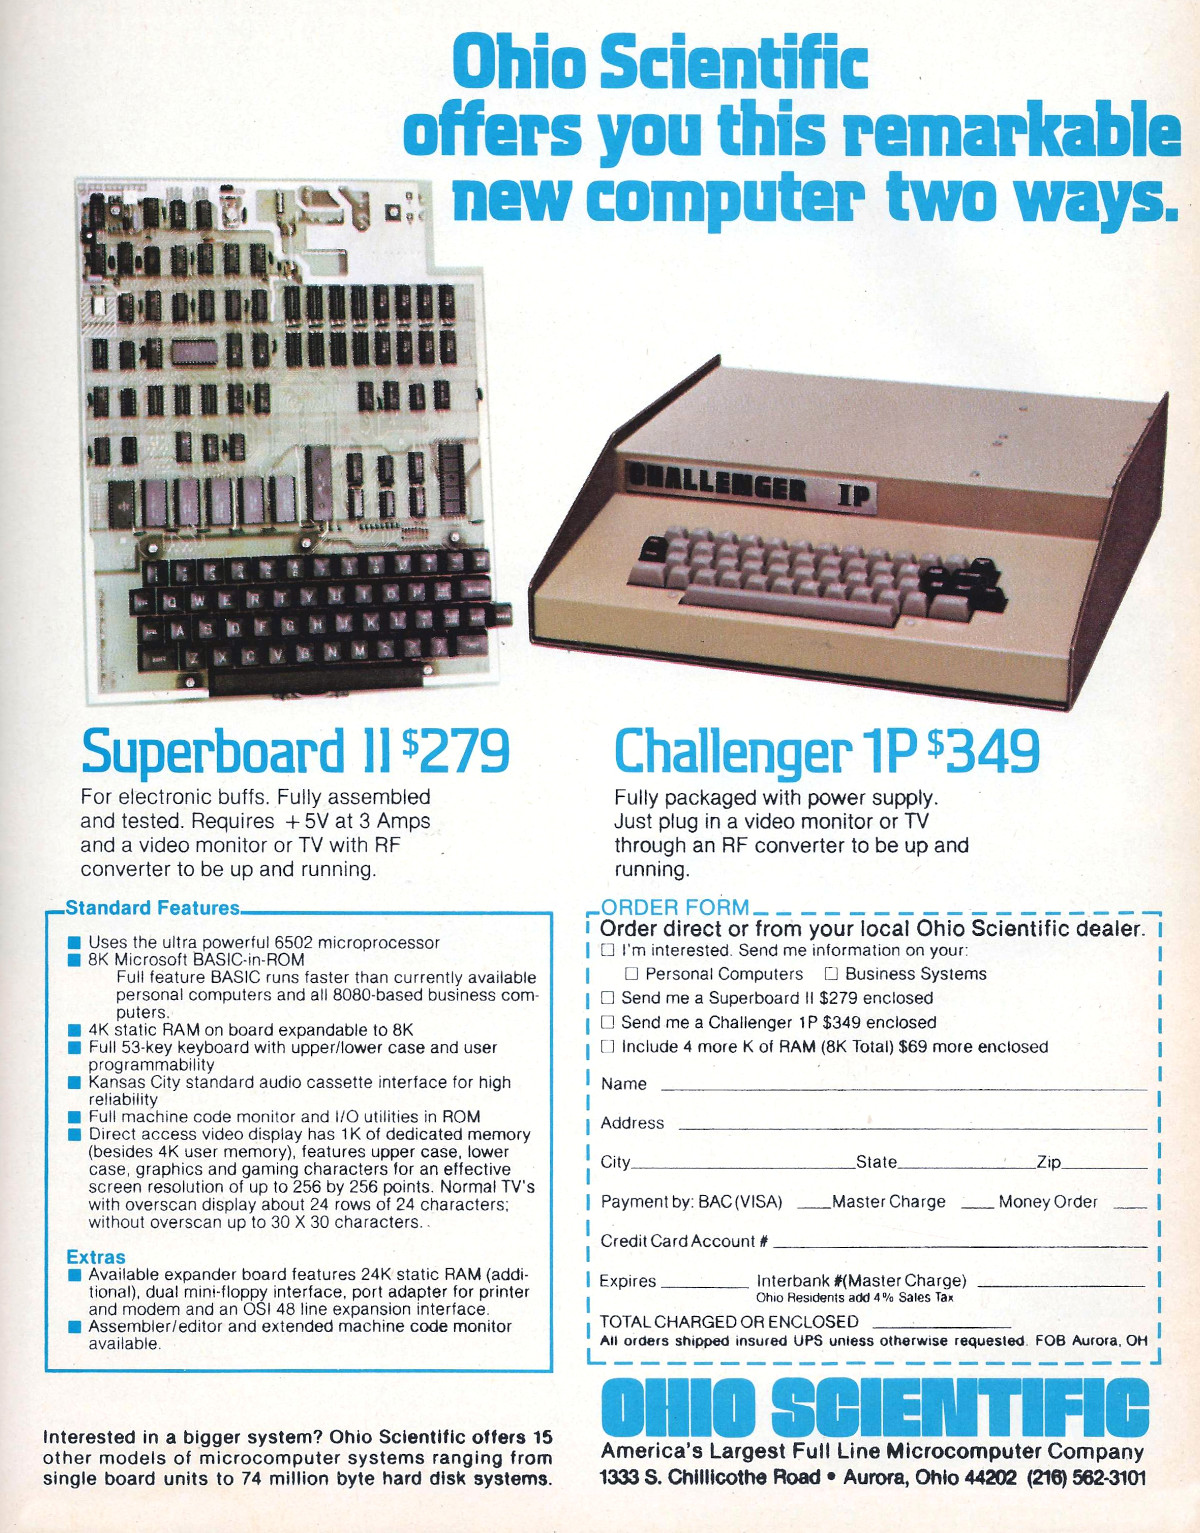 Ohio's Superboard II - the basis of many of the company's <span class='hilite'><span class='hilite'><span class='hilite'>microcomputer</span></span></span>s. From Byte, December 1978